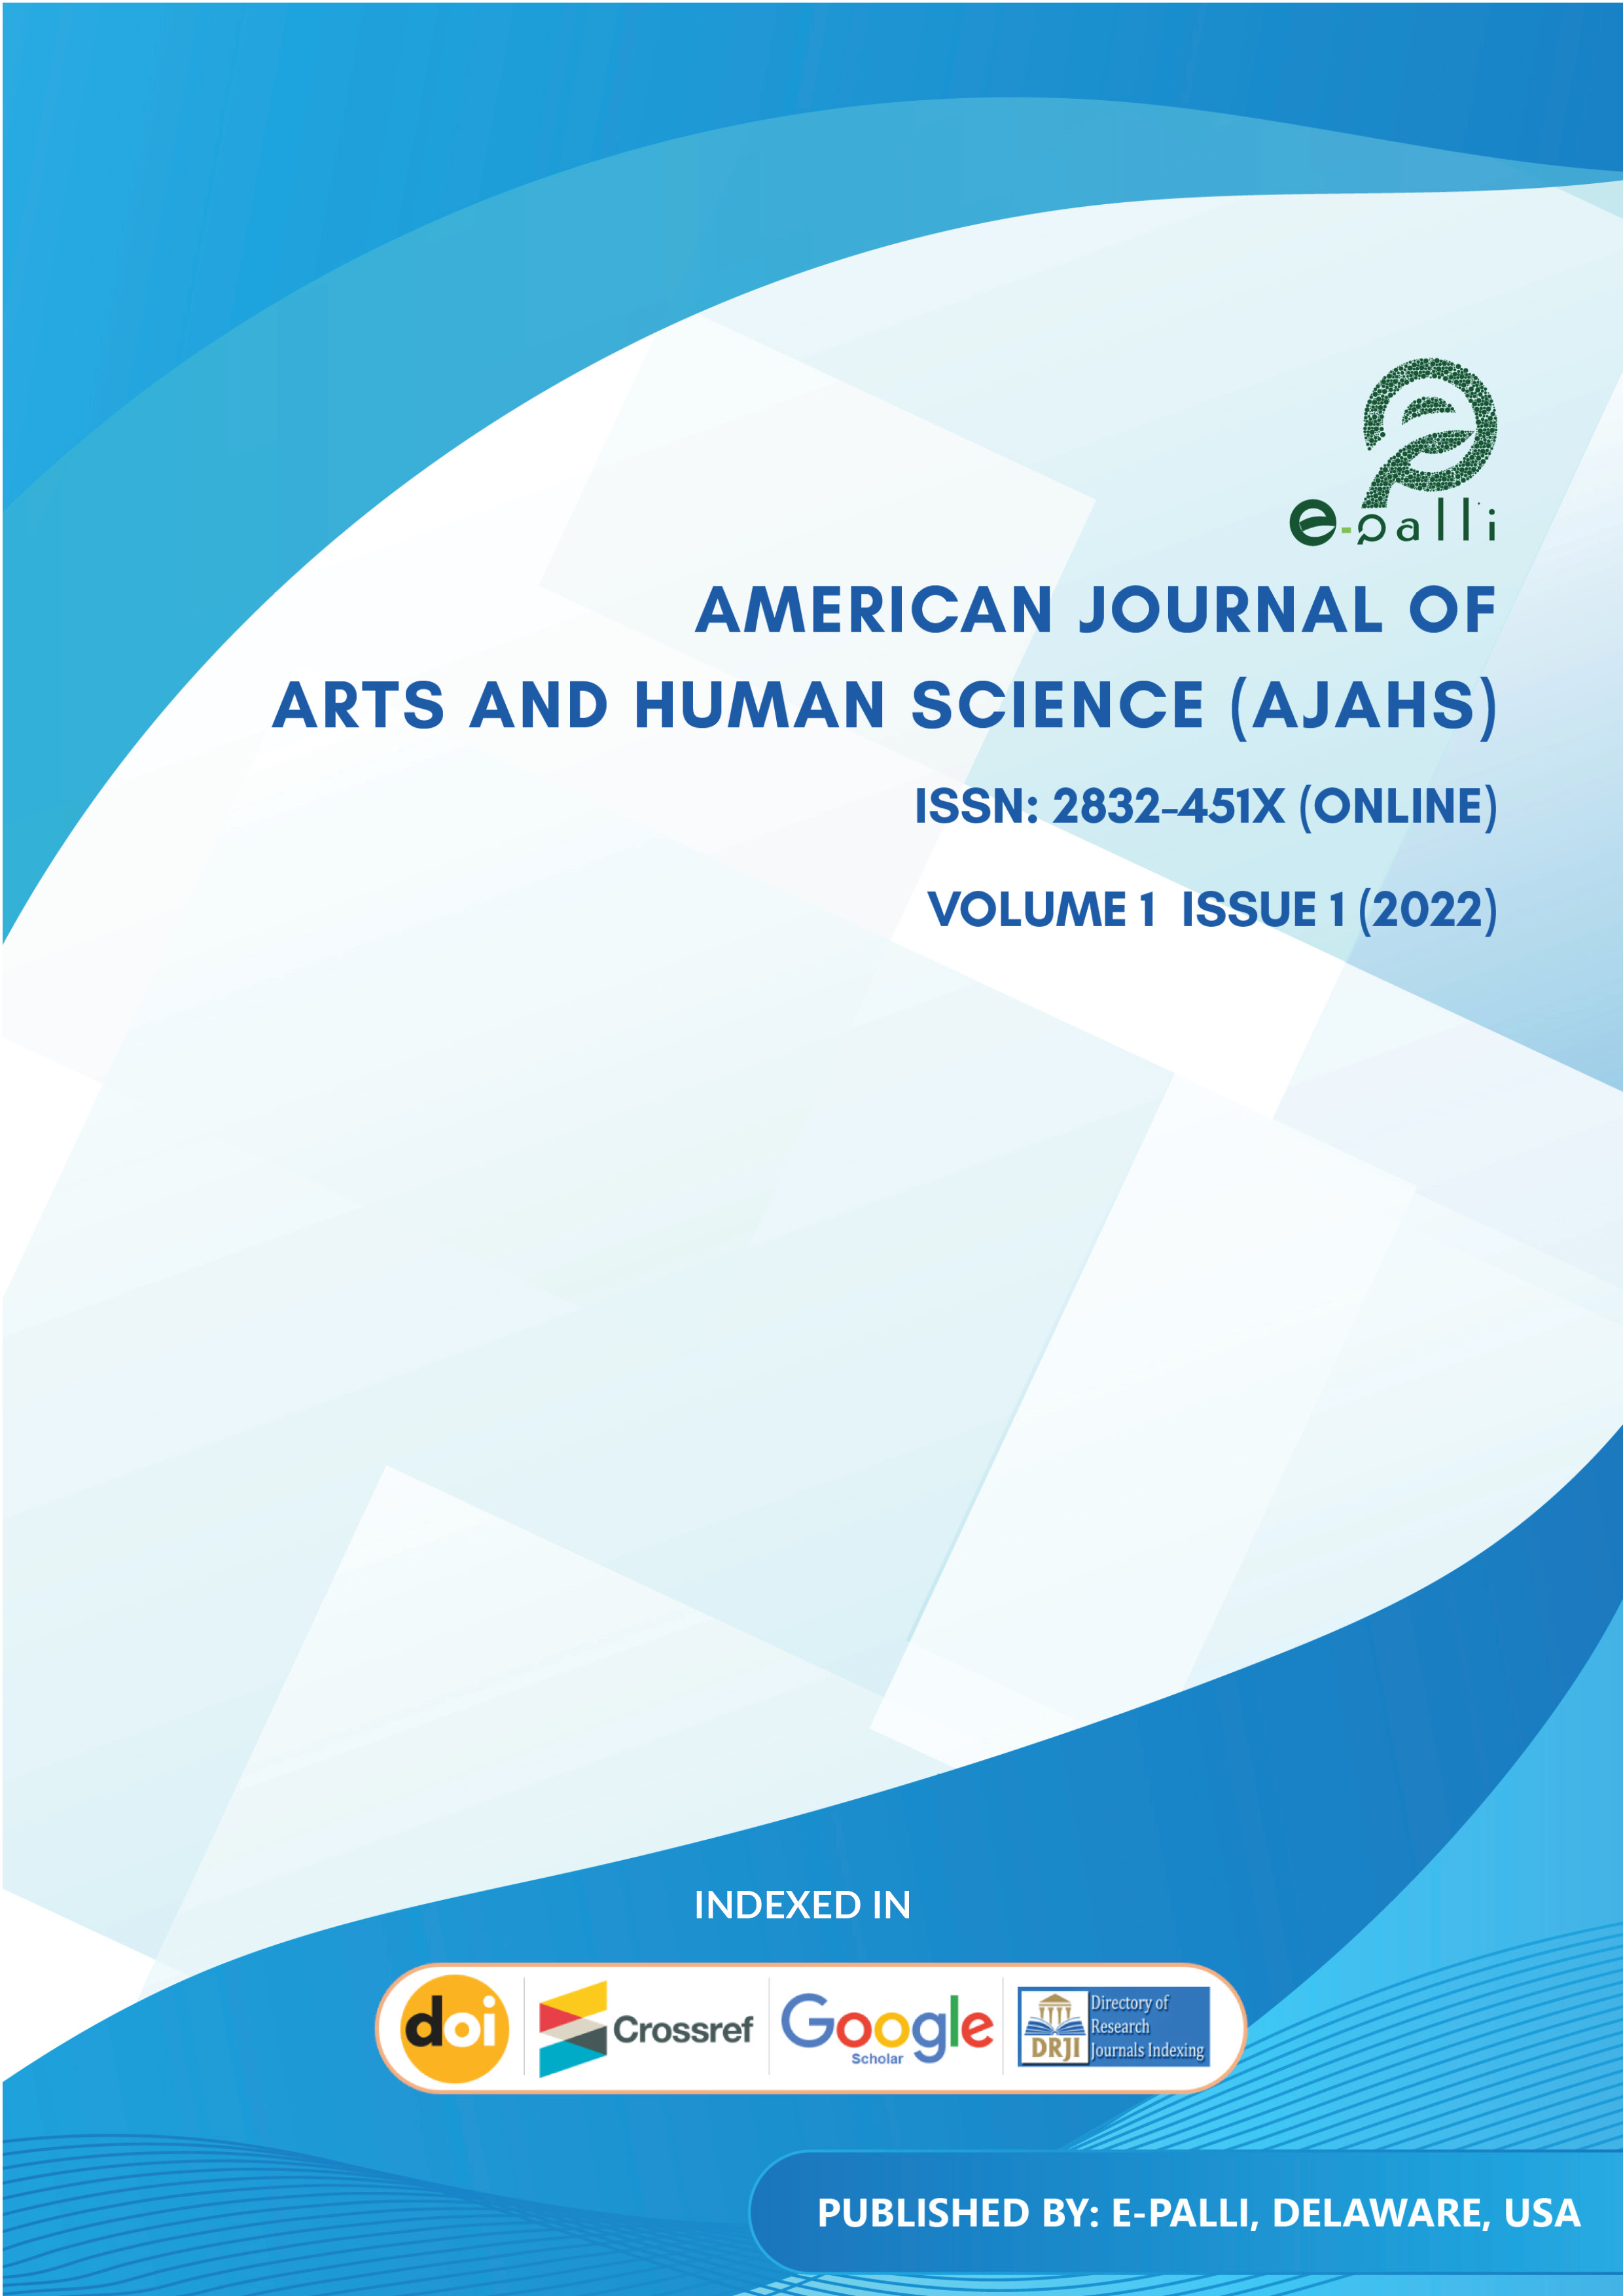 					View Vol. 1 No. 1 (2022): American Journal of Arts and Human Science
				